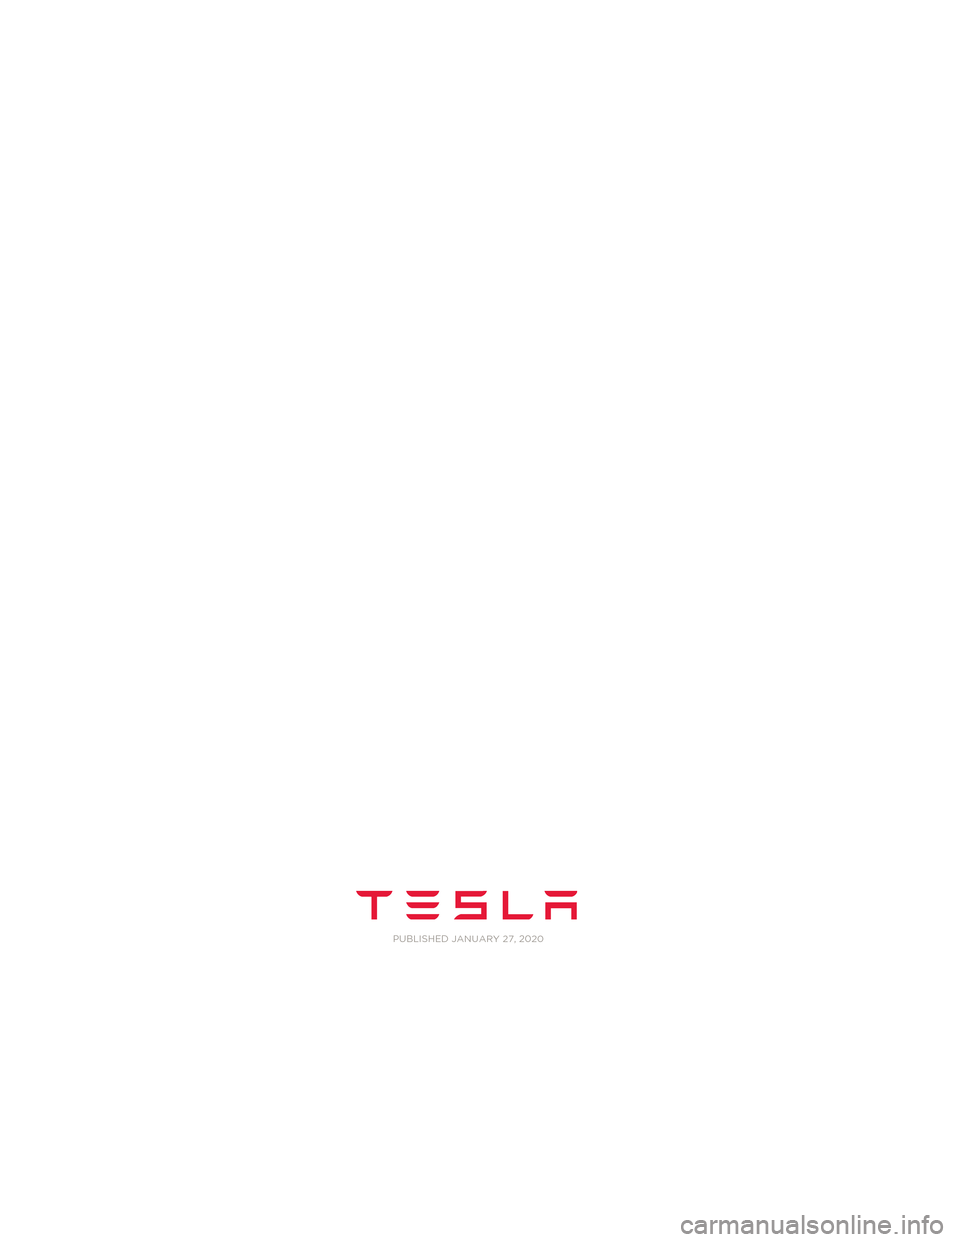 TESLA MODEL 3 2020  Manual del propietario (in Spanish) Model S Quick Guide - NA Rev C.book  Page 2  Wednesday, December 18, 2013  12:40 PM P
UBLISHED JANUARY 27, 2020 